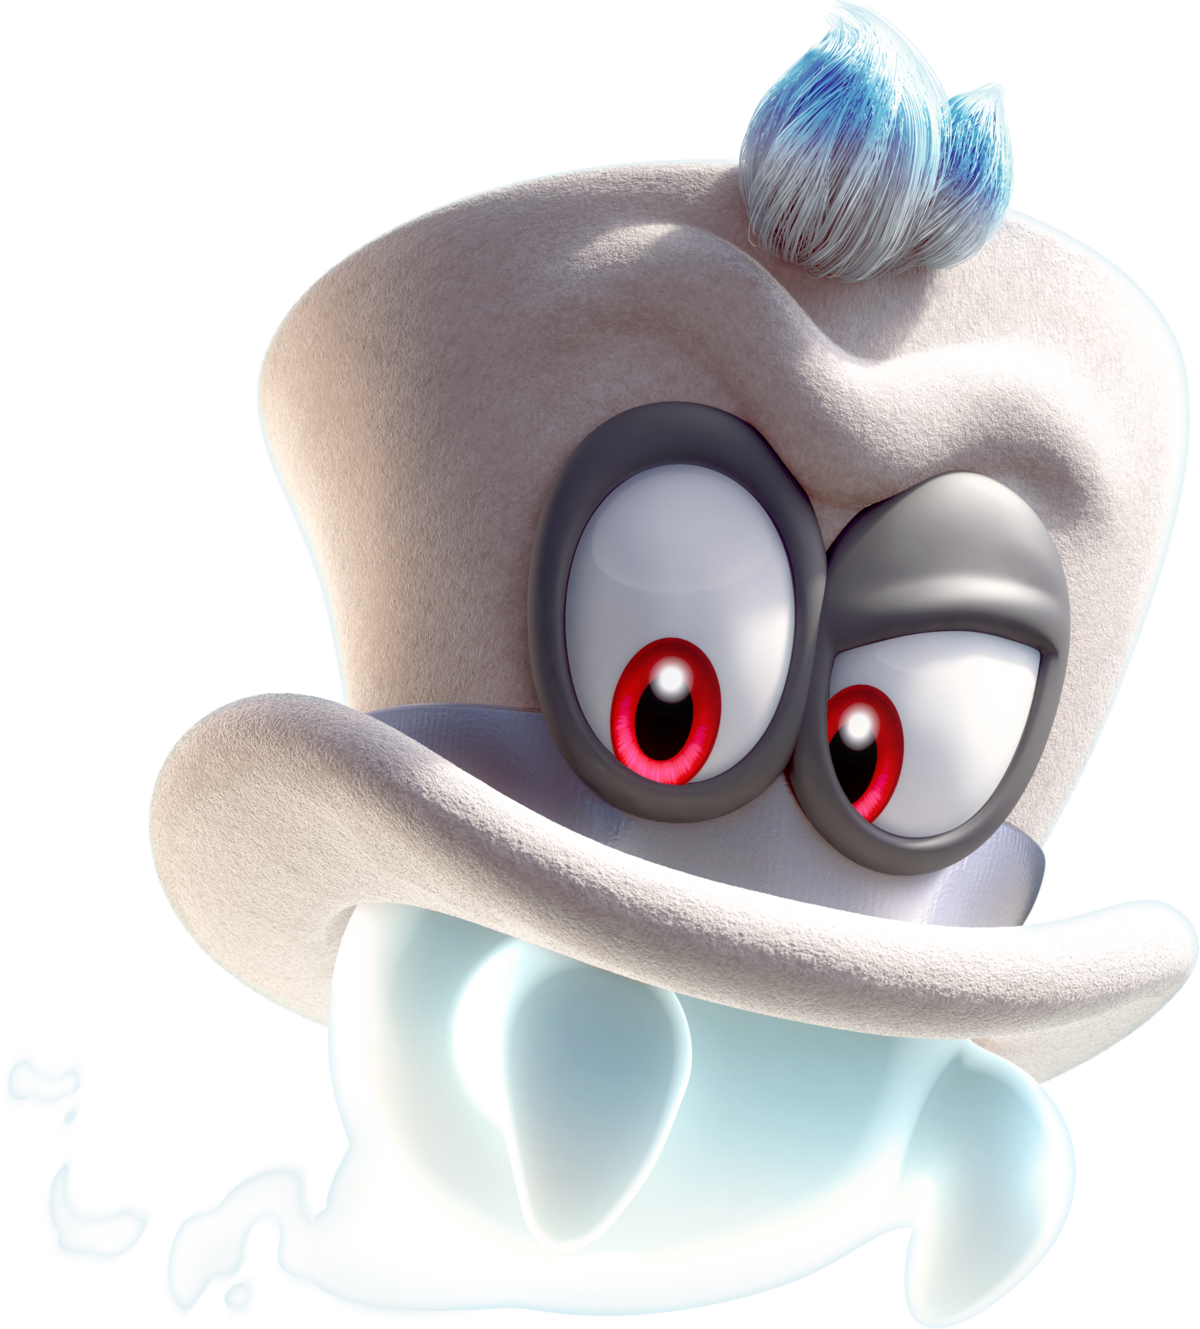 https://www.mariowiki.com/images/thumb/c/c4/SMO_Art_-_E3_Char4.png/1200px-SMO_Art_-_E3_Char4.png